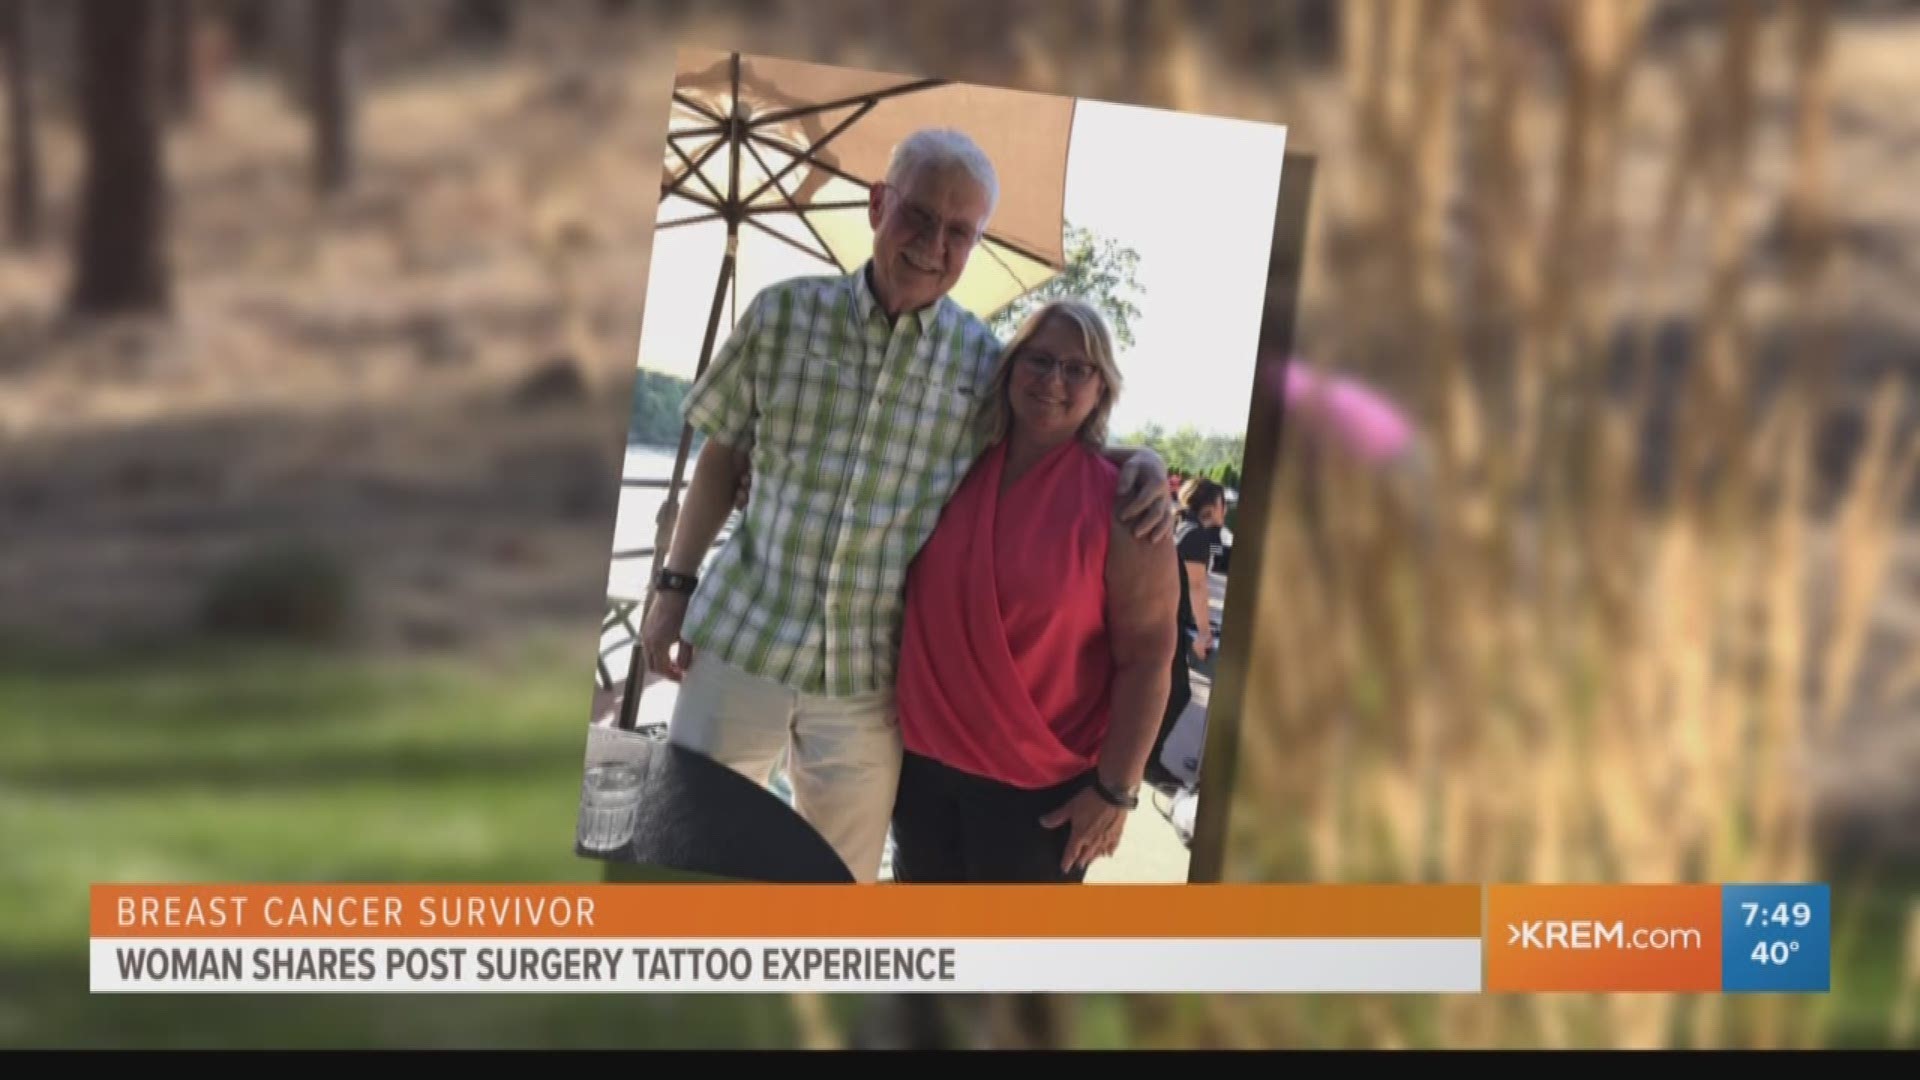 Breast cancer survivor shares post-surgery tattoo experience